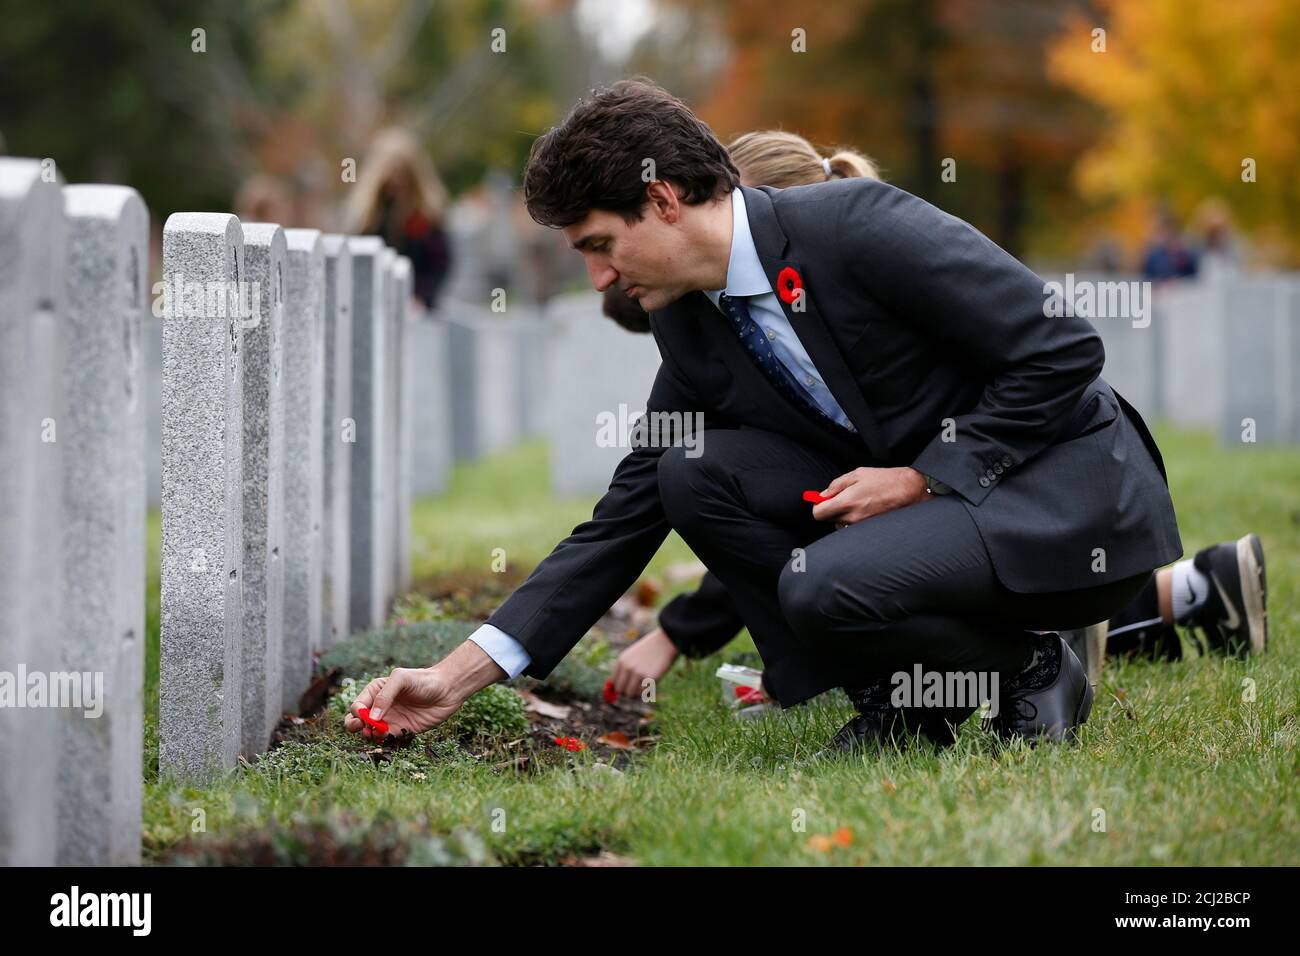 Canada's Prime Minister Justin Trudeau places a poppy at a grave during an event to mark the upcoming Veterans' Week and 100th anniversary of the Battle of Passchendaele at the National Military Cemetery in Ottawa, Ontario, Canada, November 3, 2017. REUTERS/Chris Wattie Stock Photo